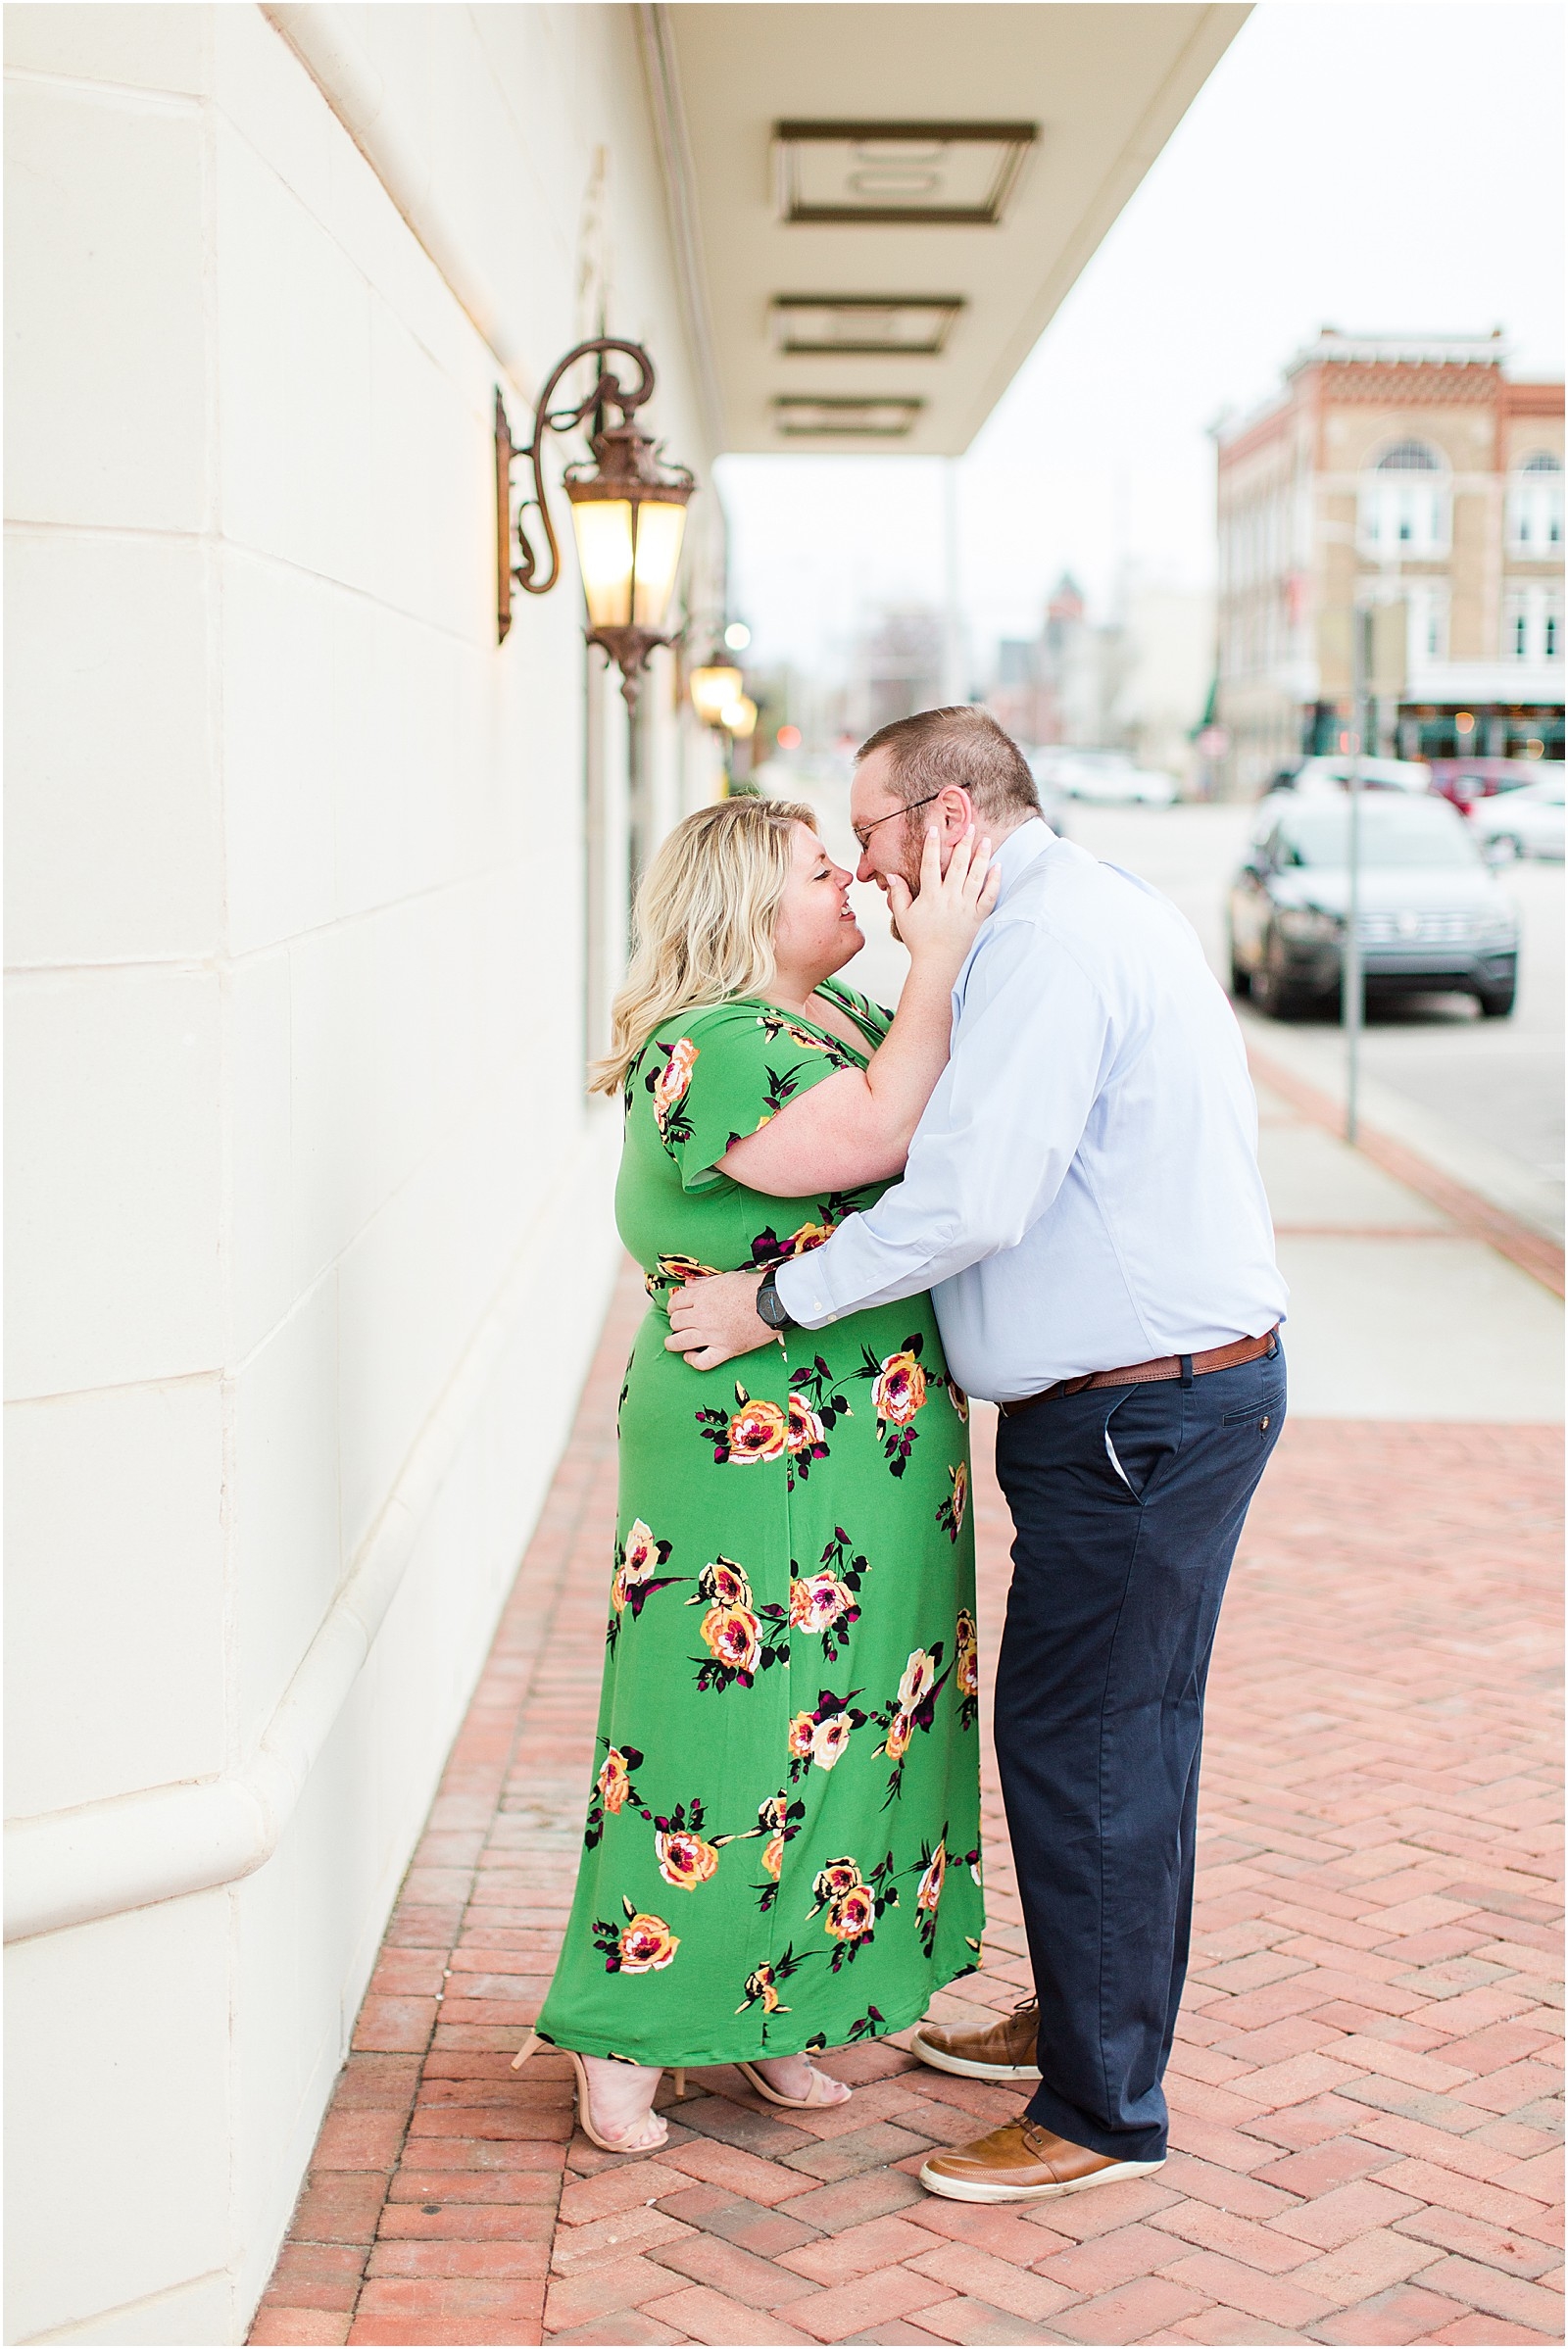 A Downtown Owensboro Engagement Session | Brittany and Neil | Engaged | | 0017.jpg